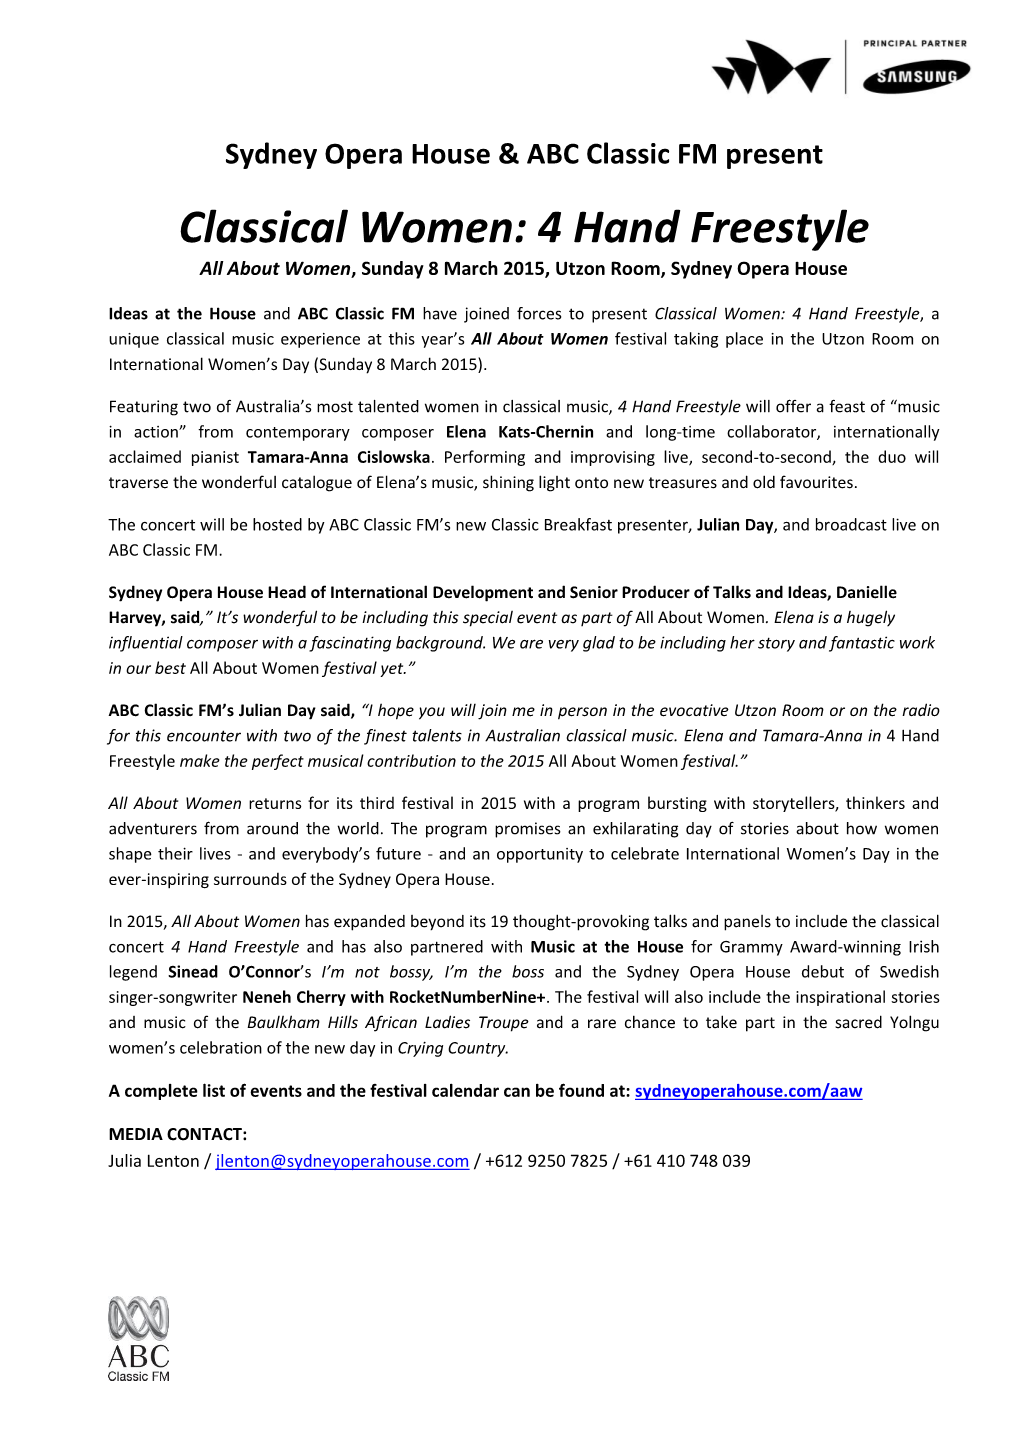 Classical Women: 4 Hand Freestyle All About Women, Sunday 8 March 2015, Utzon Room, Sydney Opera House